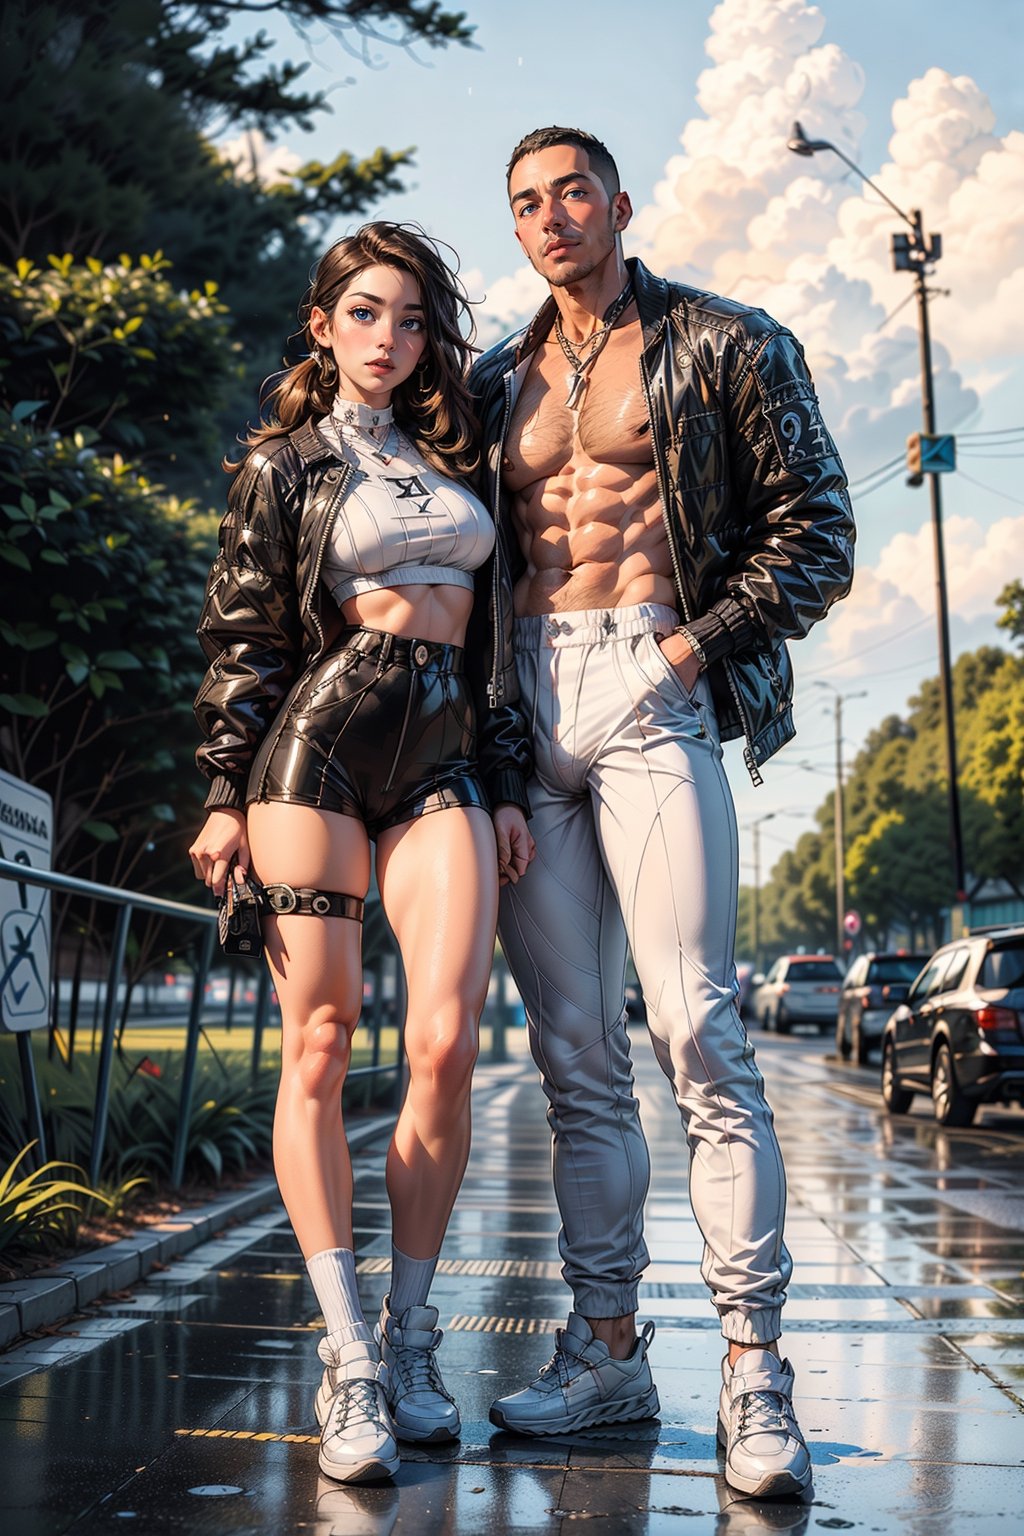 (((hetero couple:1.4))), (((1girl small, childish face, and 1man, black, manly, muscular)))  (((man is 30yo, tall and muscular, wearing large sport clothes, large shirt and large short, manly body, bad boy))), (((girl is 16yo, SLUT, oversized_puffer_jacket, small and skinny, small breast, long hair, pony tail, small tanga, perfect shaved pussy, tight gap, cameltoe, makeup, normal breast, open legs, wearing a chocker)), socks, midriff, ((tree)), realistic, cloudy sky, scenery, photo background, bangs, smiling, hourglass body shape, slim waist, full-body_portrait, sexy, (wearing big all white balenciaga sneakers:1.4) , rain clouds , seductive, open eyes, seductive_pose, sultry_pose, golden_hour_light, (((age difference, size_difference))), (((the man is taller and stronger than the girl))), girl is holding a small Jacquemus handbag, submissive girl, she is horny, she is really young, low view